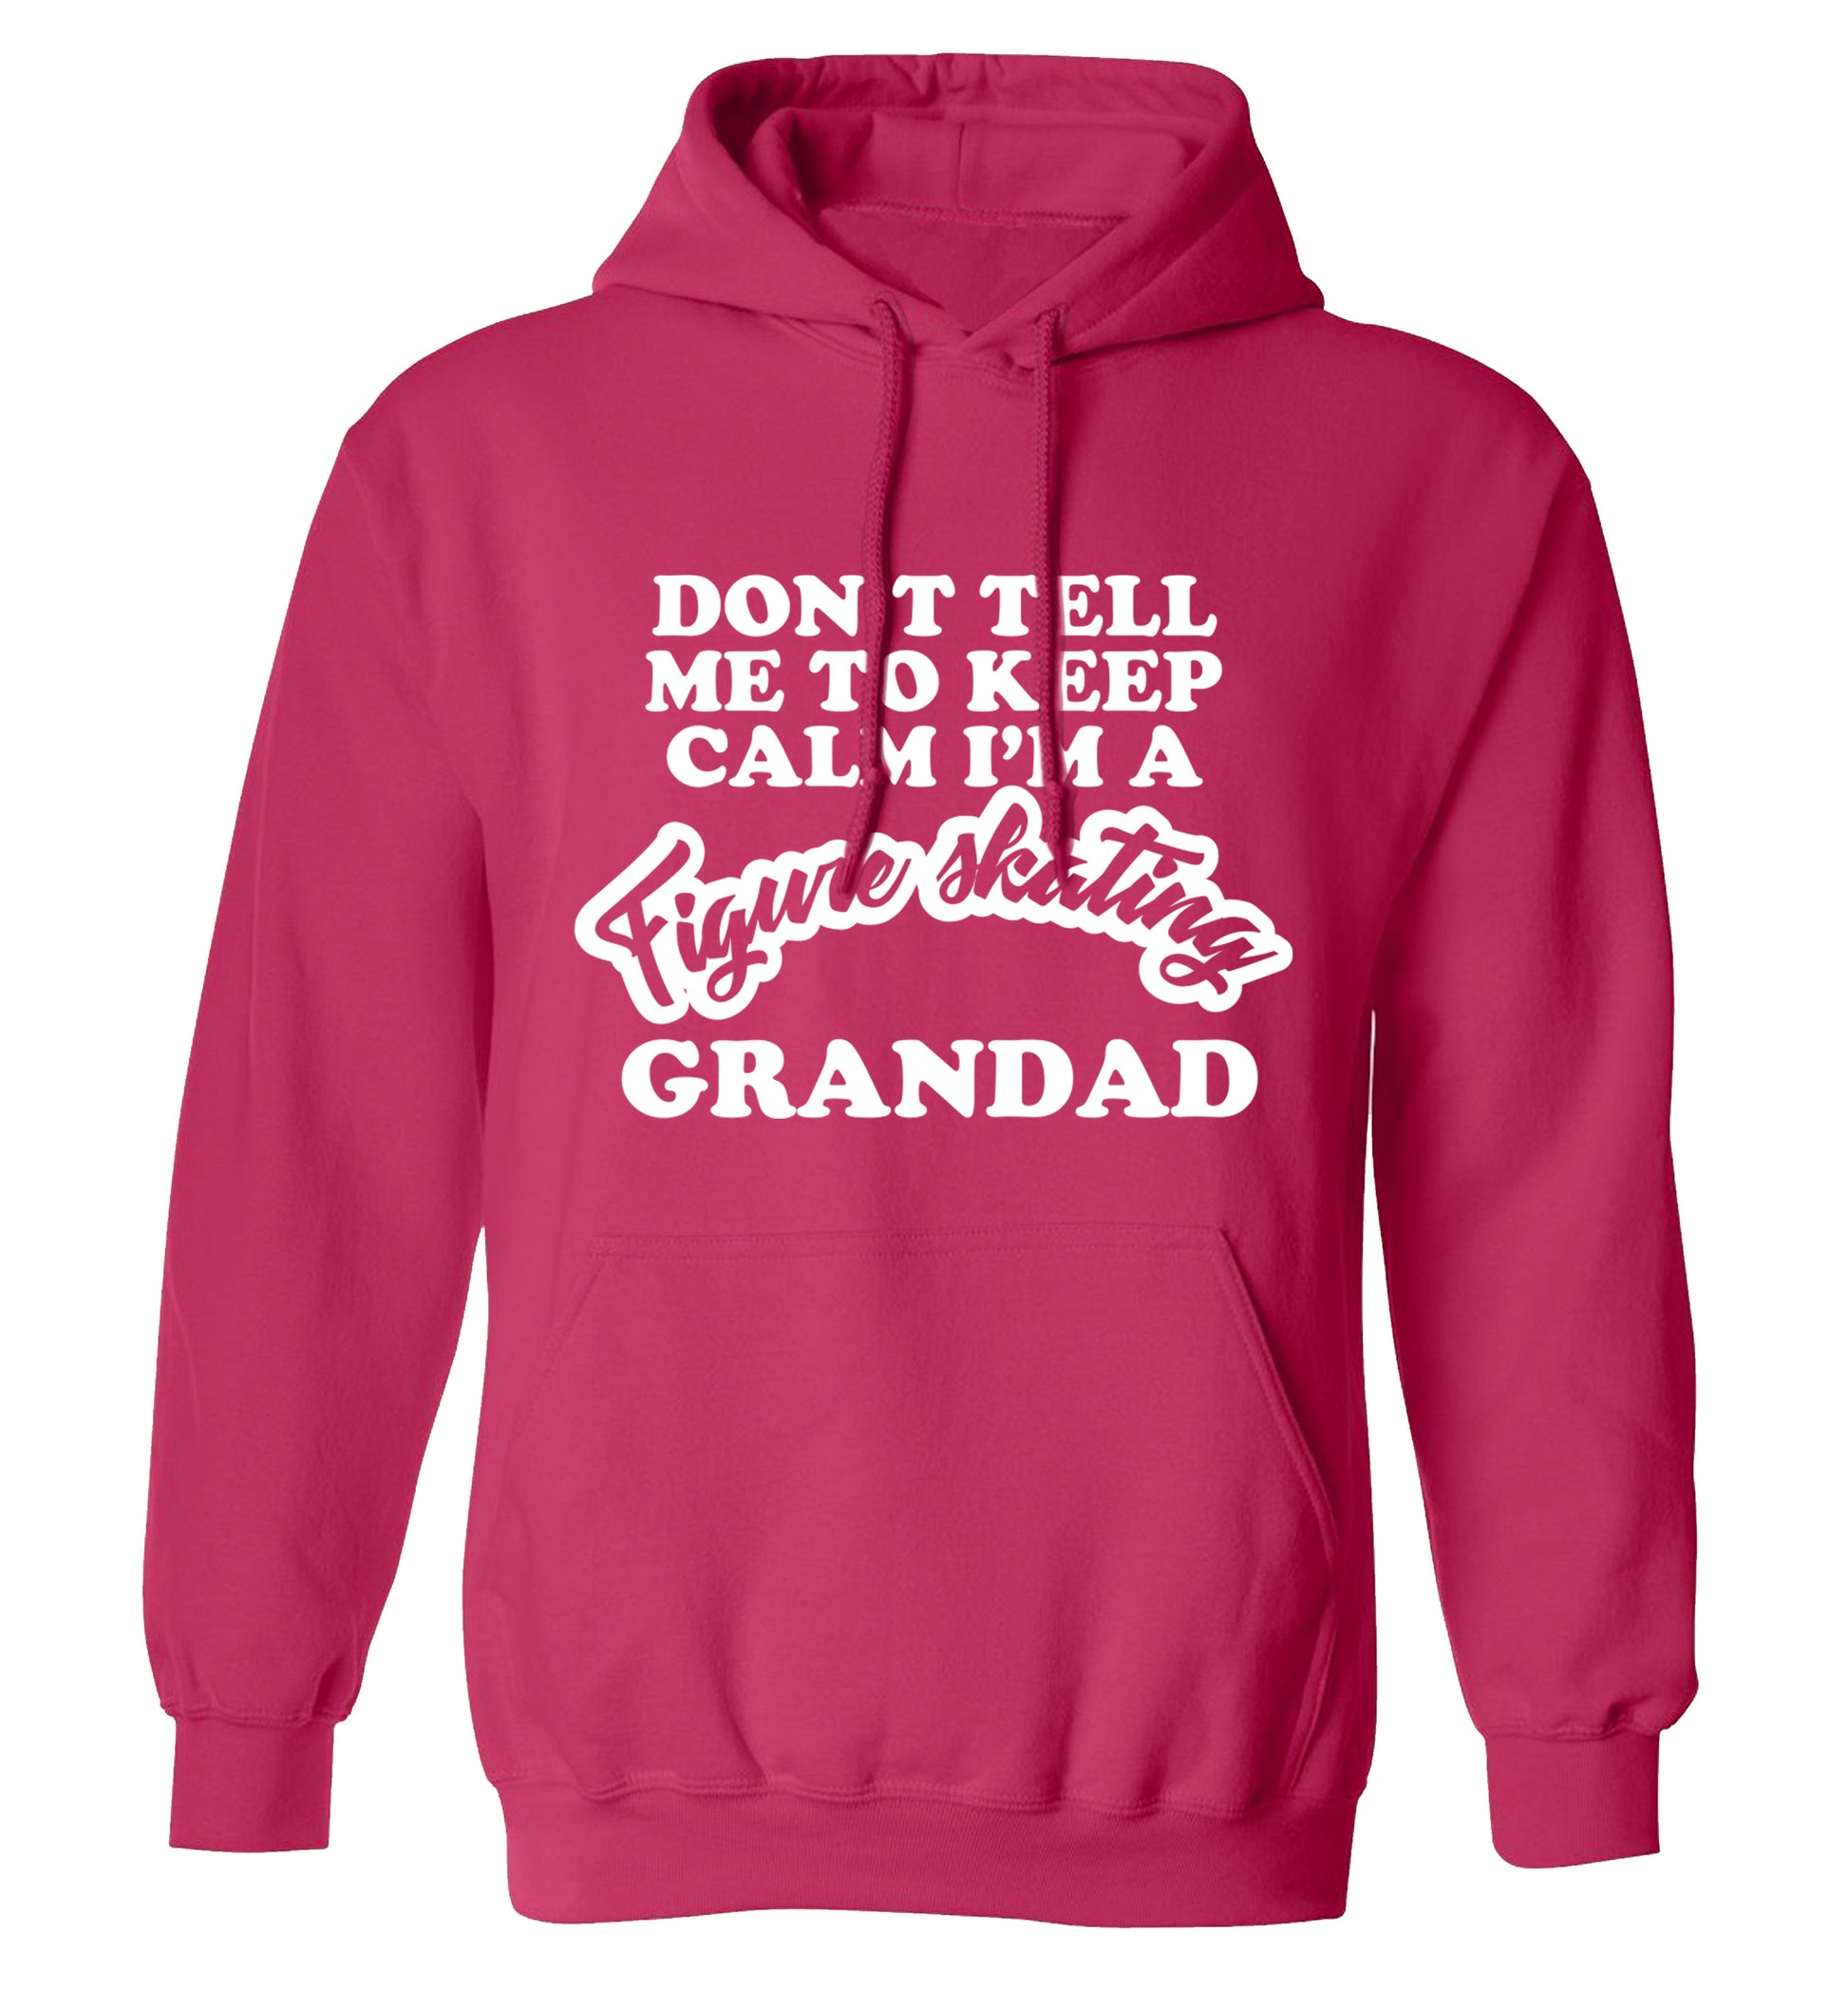 Don't tell me to keep calm I'm a figure skating grandad adults unisexpink hoodie 2XL